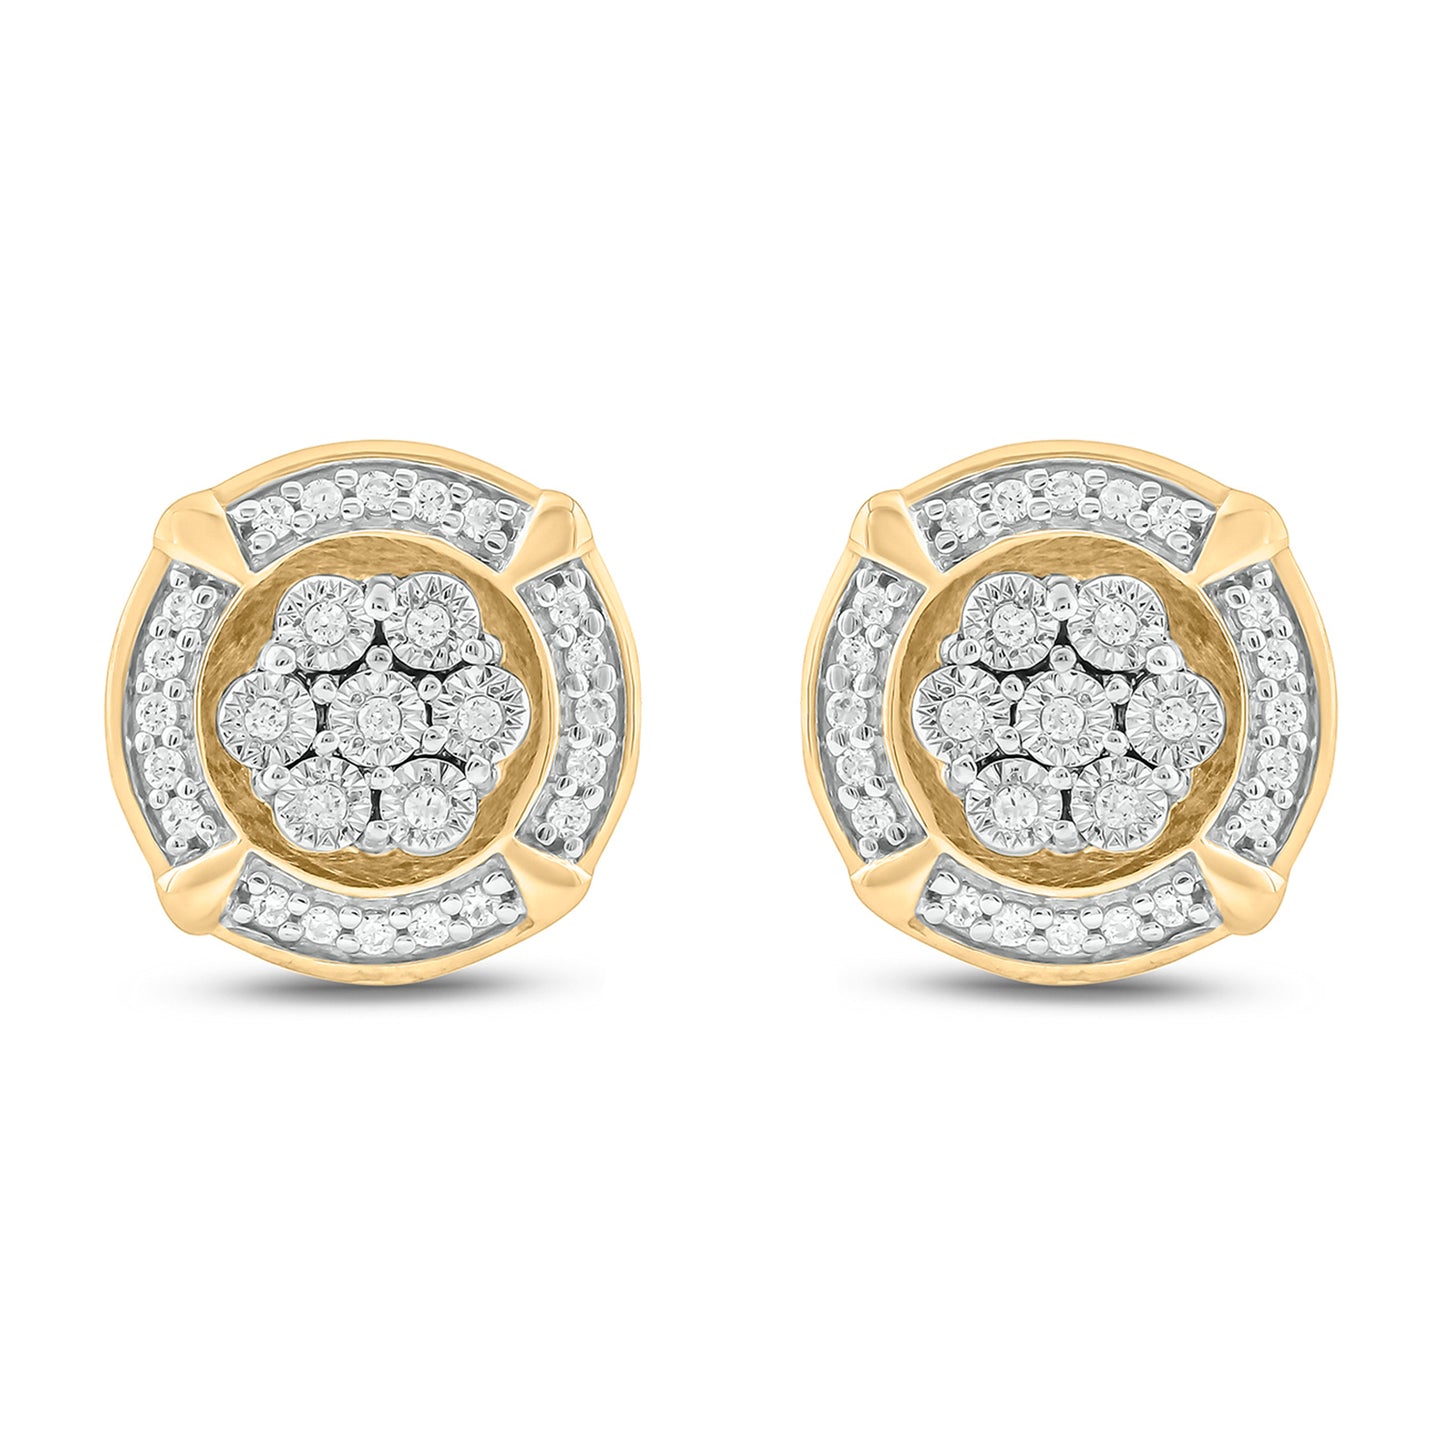 Men's Round Cluster Stud Earrings in Gold Plated Sterling Silver